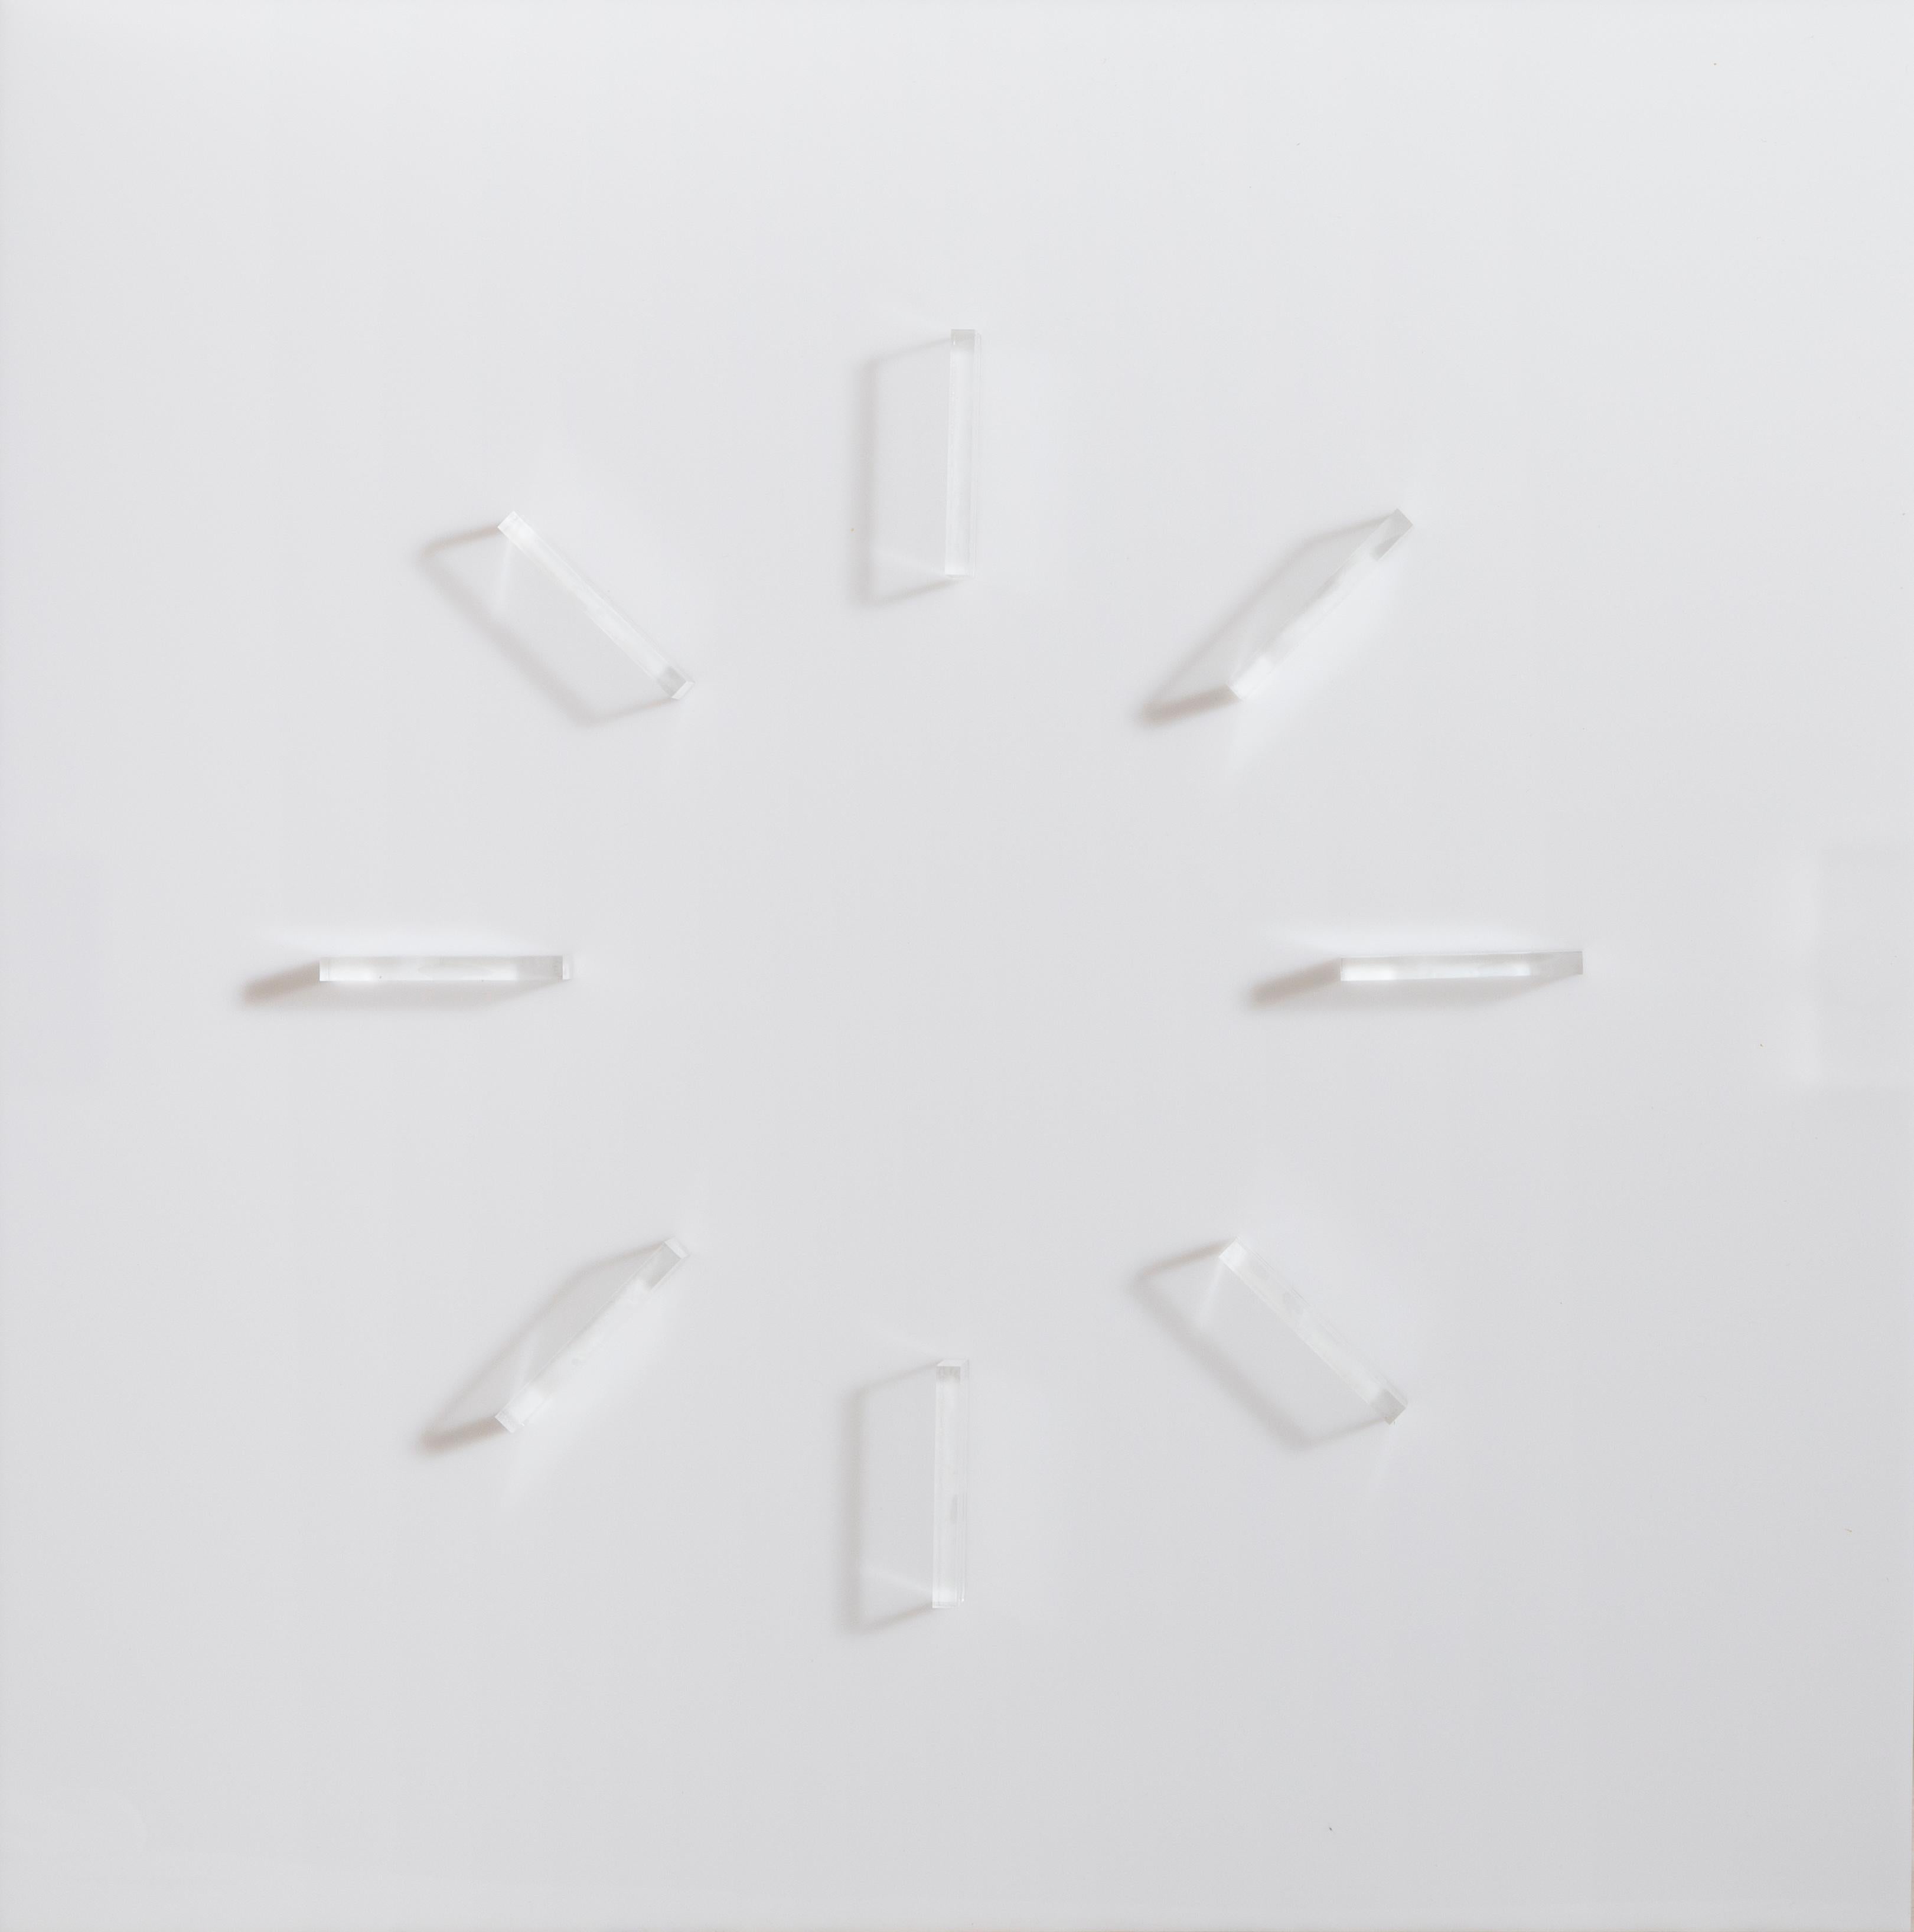 Artist: Mon Levinson, American (1926 - 2014)
Title: Sun Clock
Year: 1969
Medium: Clear and frosted plexiglas construction
Edition: 14/90
Size: 20 x 20 in. (50.8 x 50.8 cm)